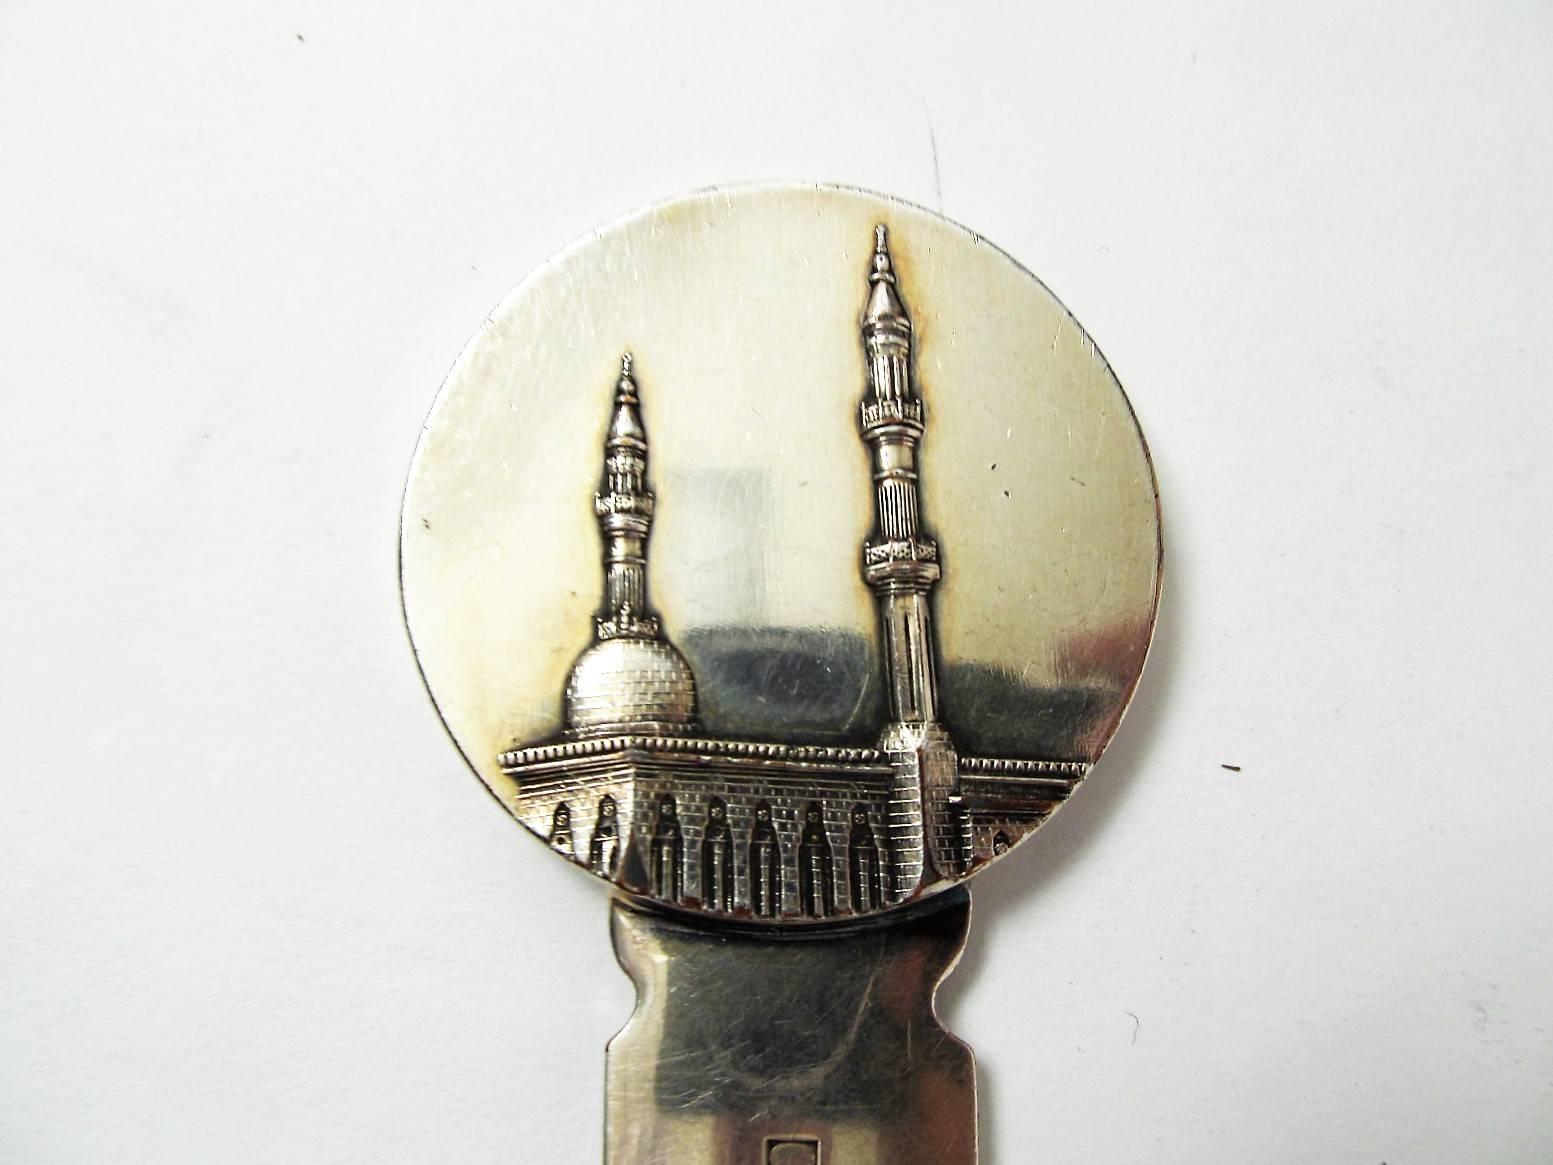 This piece seems to harken back to the French colonial period, perhaps from the 1930s through the 1950s. On one side are two minarets in relief and on the opposite side a desert palm and two crossed swords. No inscription except the makers mark.